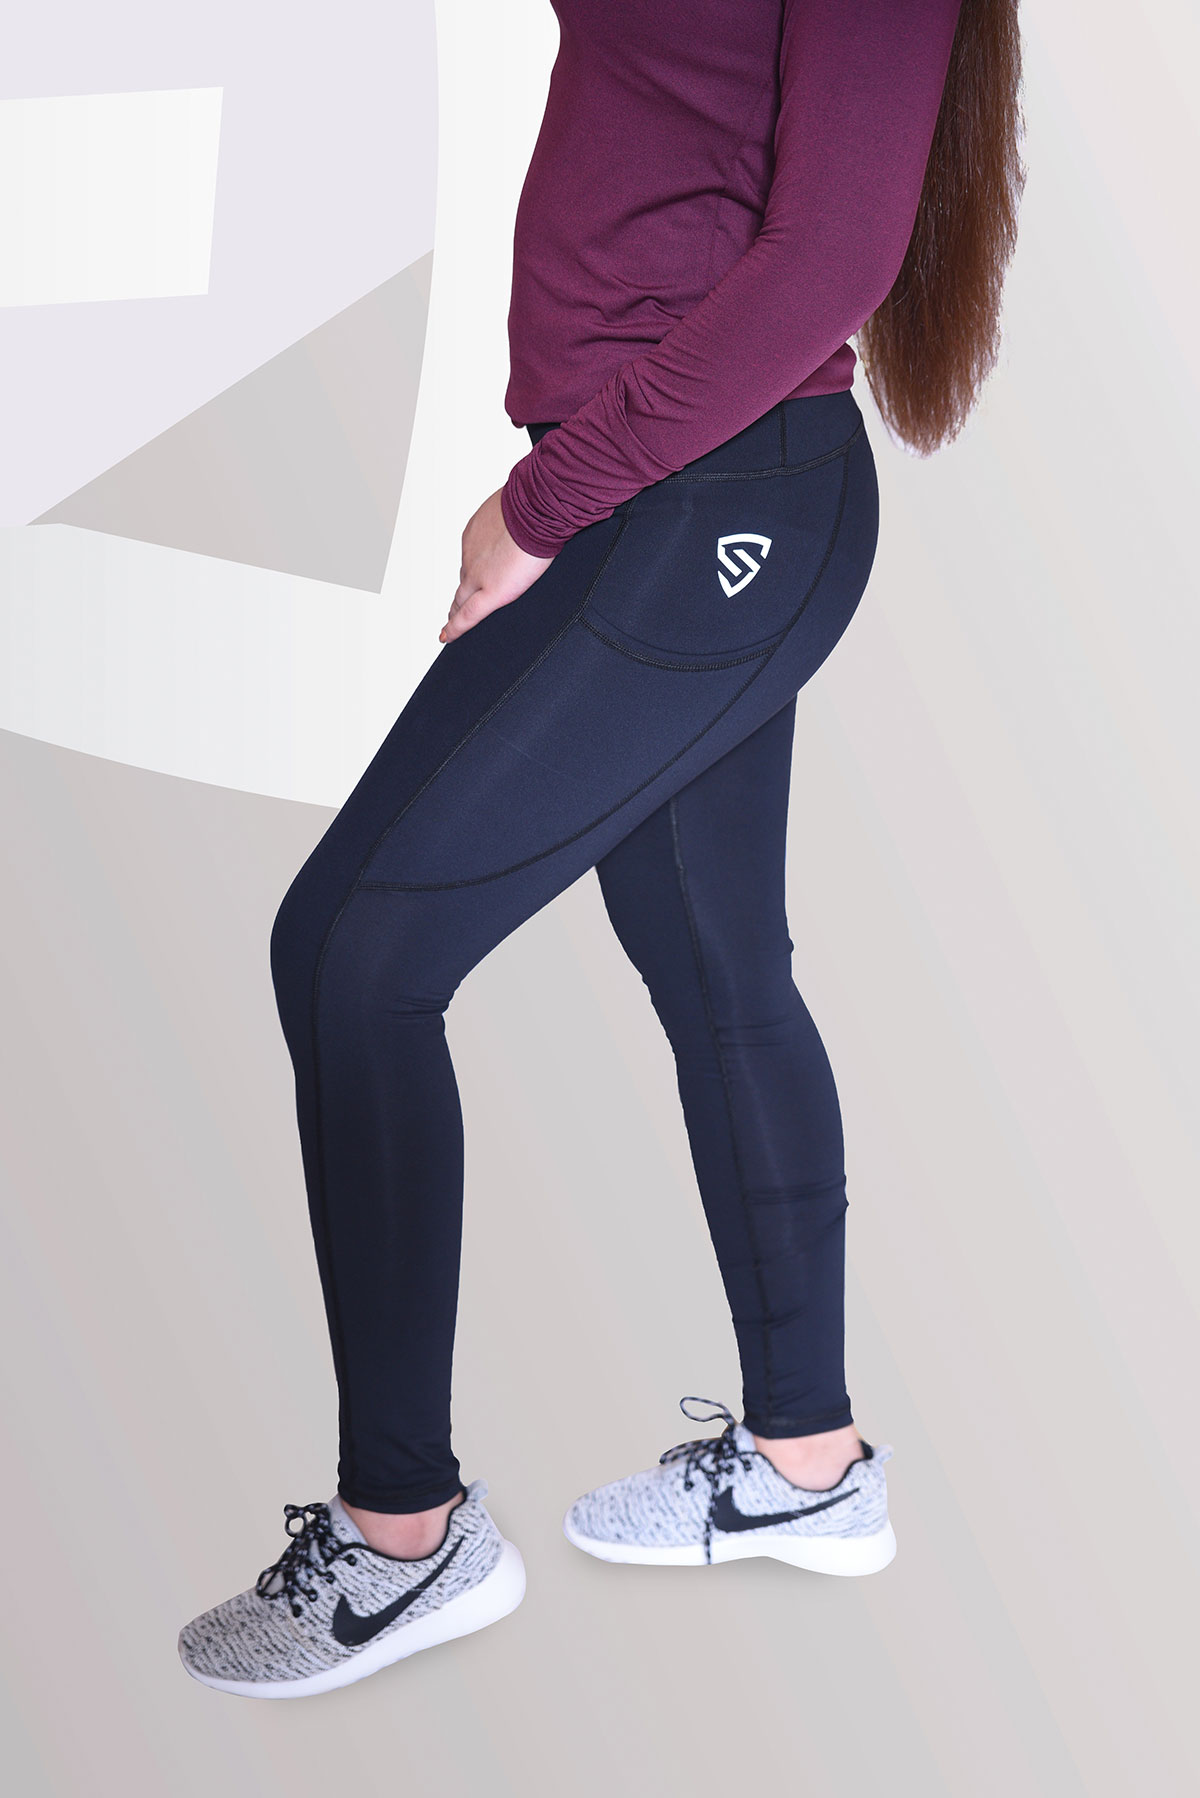 seamless yoga pants, seamless yoga pants Suppliers and